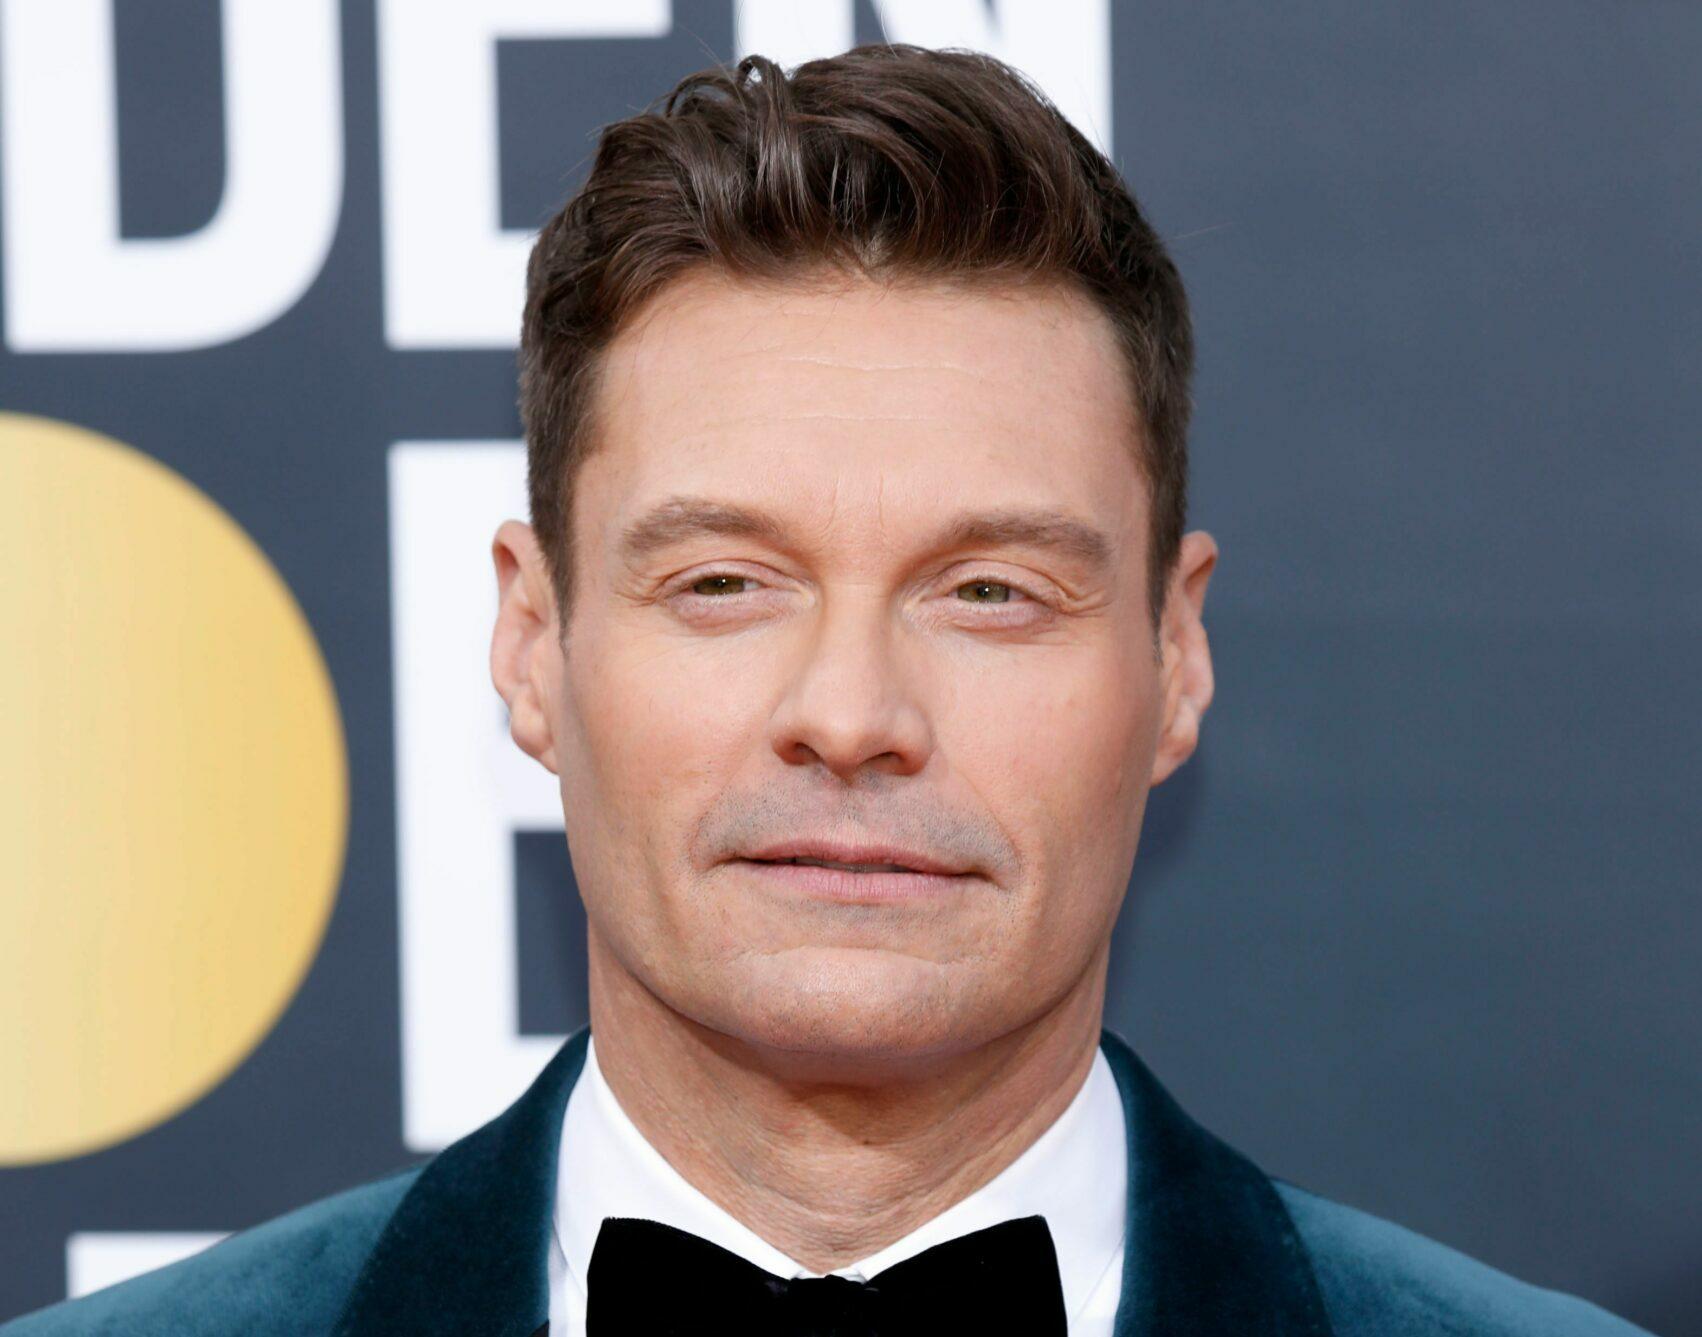 Ryan Seacrest at the 77th Annual Golden Globe Awards 2020 In Beverly Hills